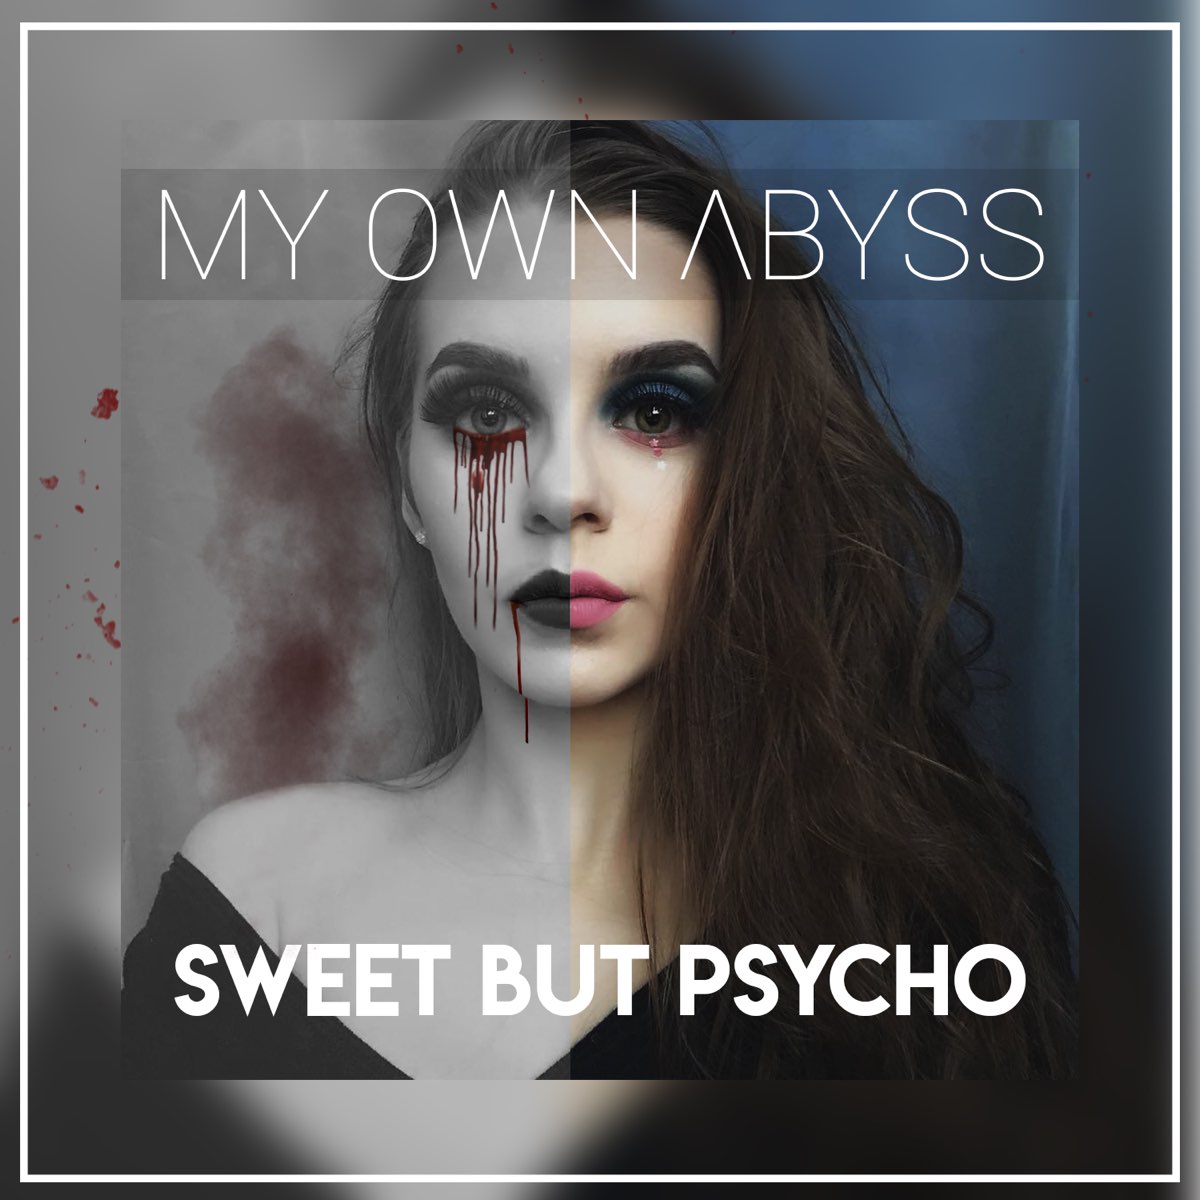 Max sweet but psycho. Sweet but Psycho обложка. Sweet but Psycho. Ava Max Sweet but Psycho. Psycho mp3.